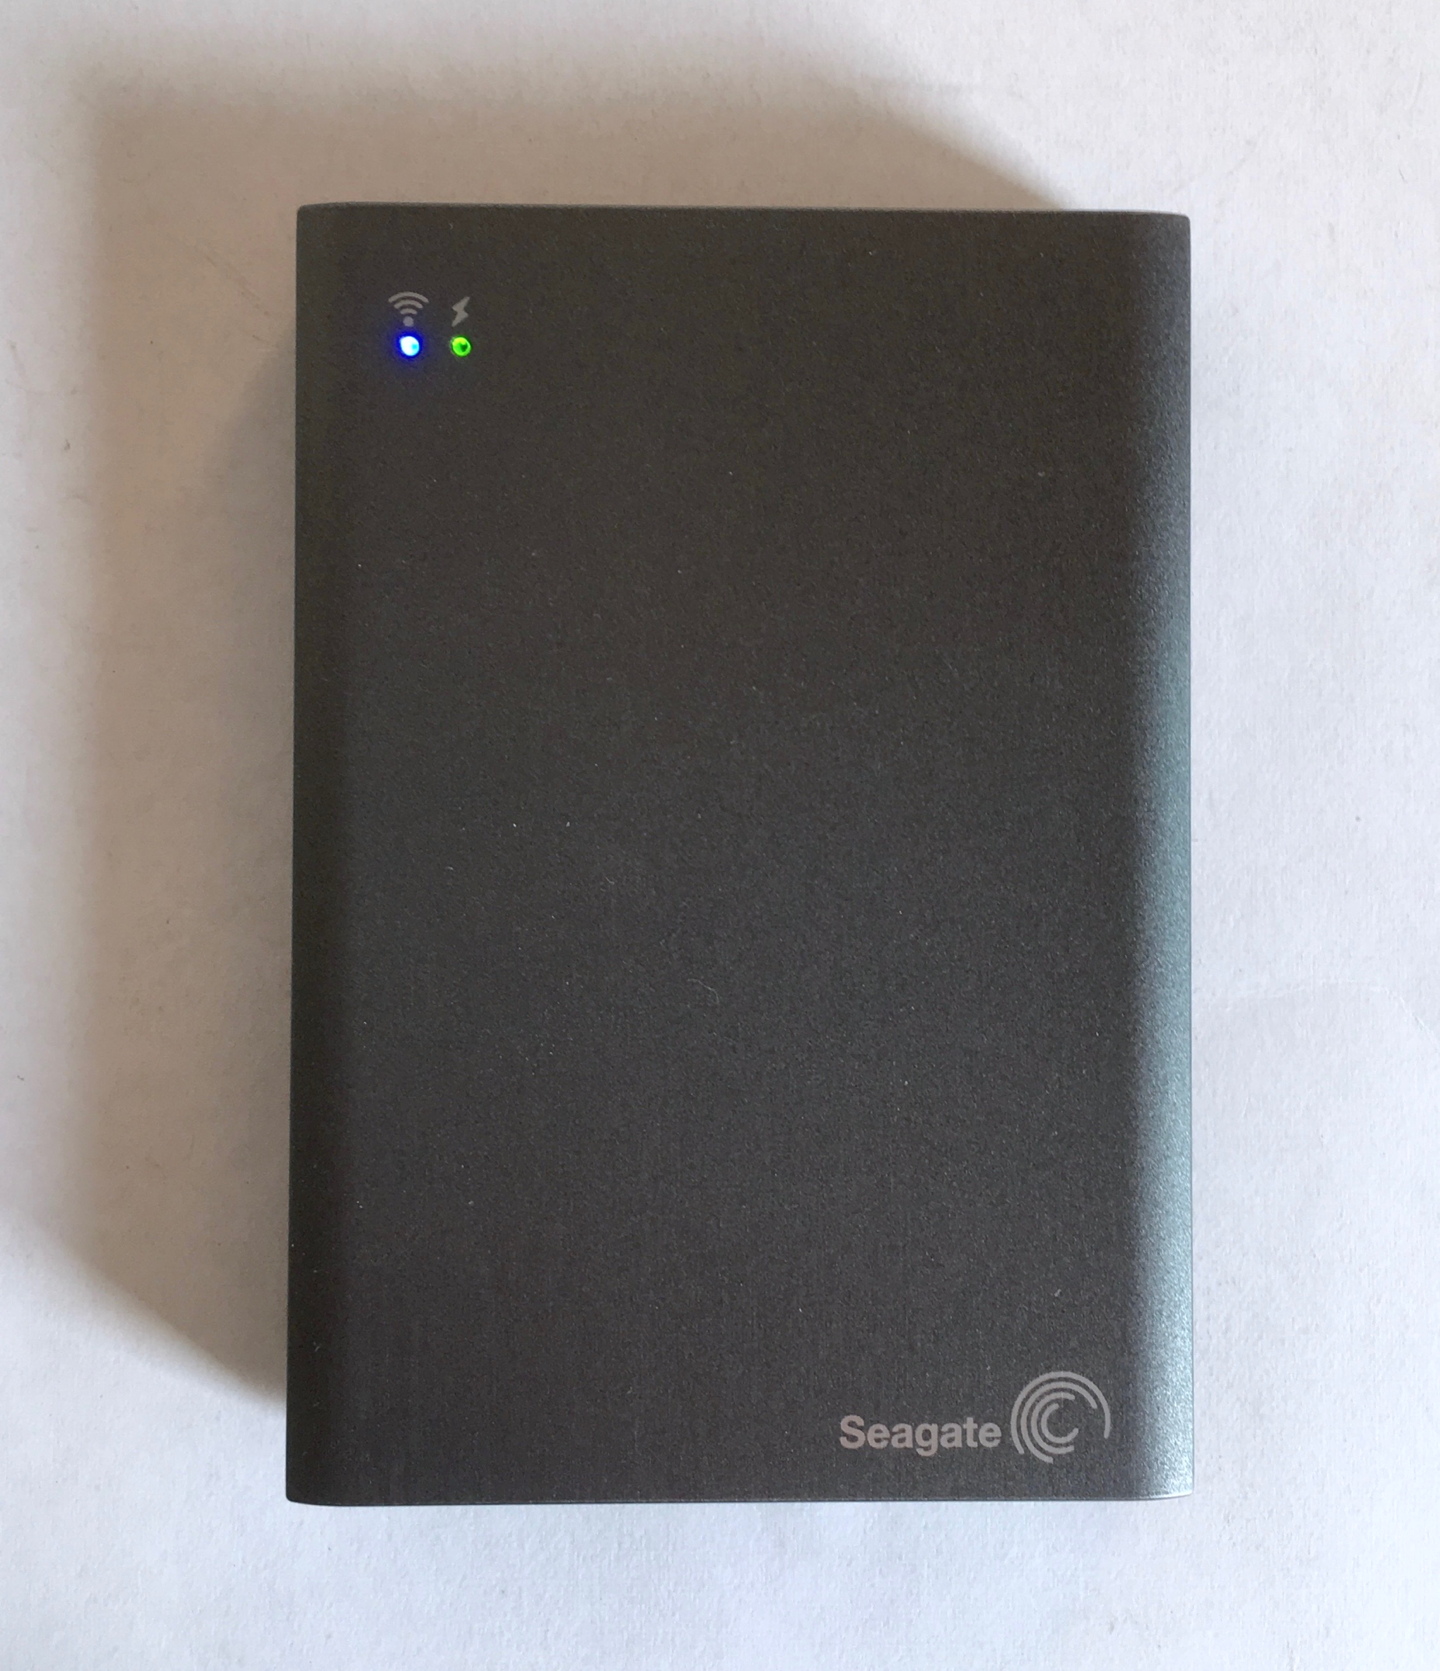 Seagate Wireless Plus - Power and WiFi Lights On